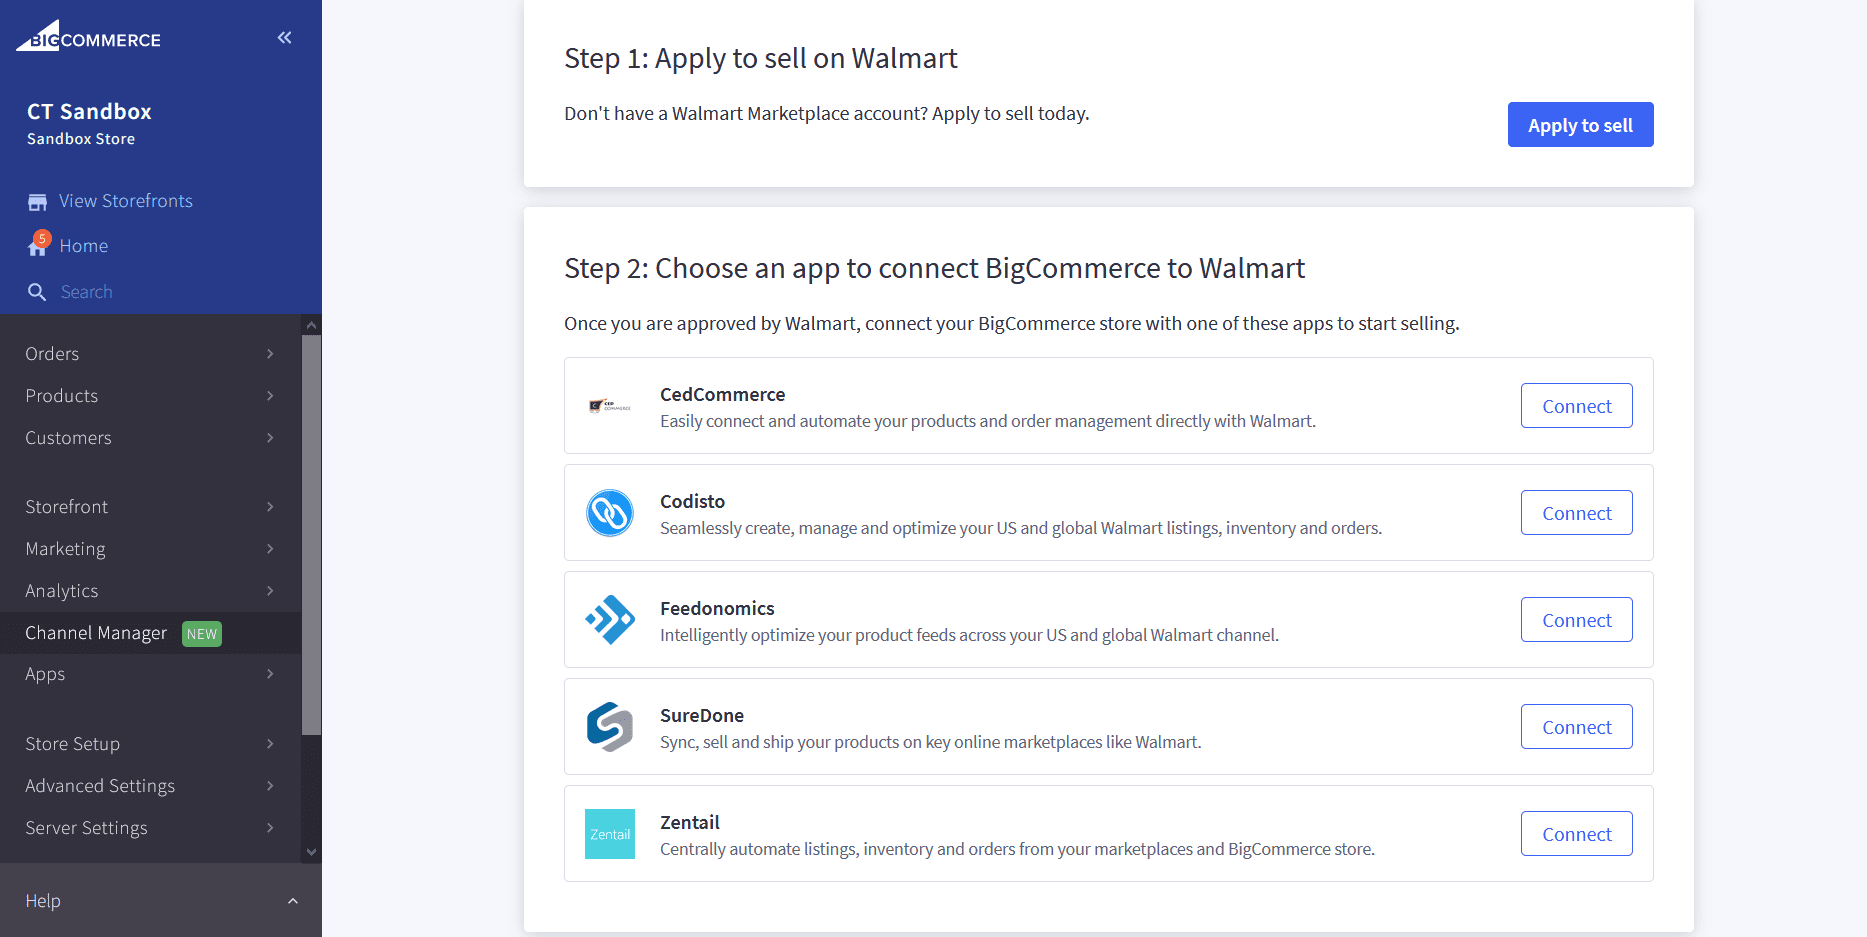 a screen with a link to apply to sell on Walmart Marketplace